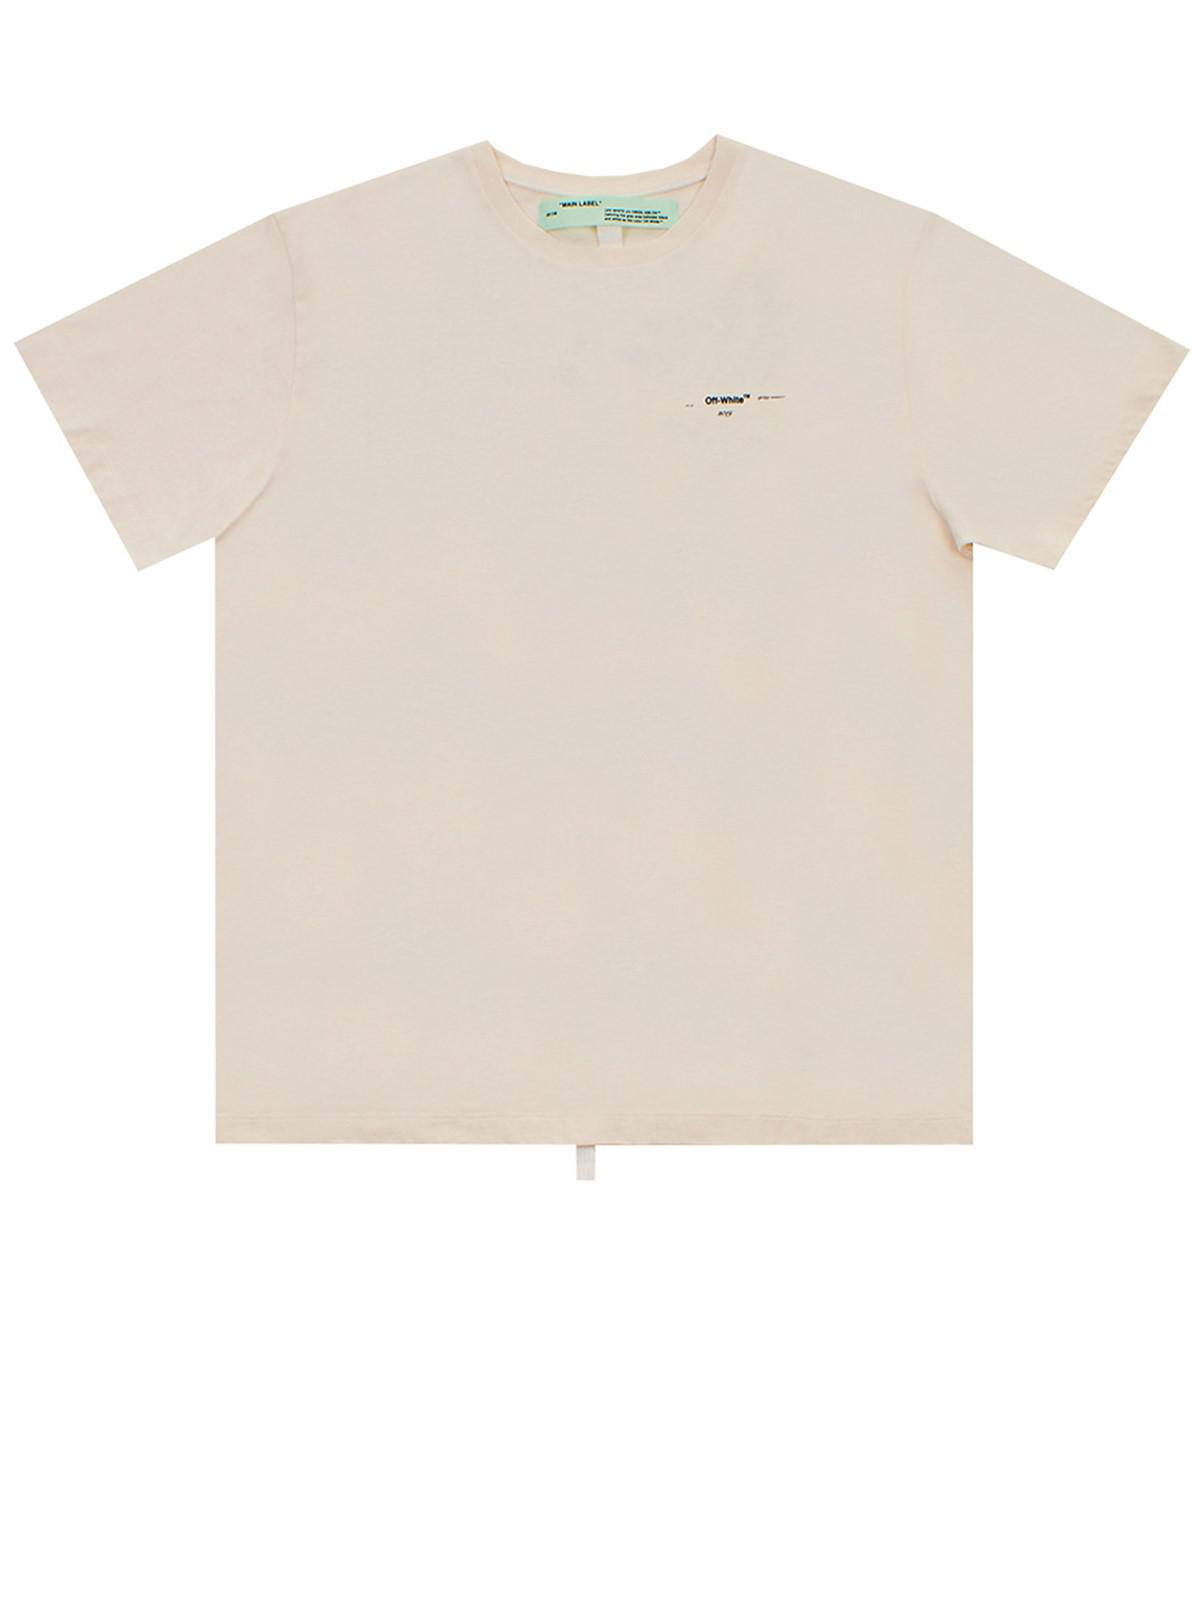 Off-White c/o Virgil Abloh Cream Colored Arrows T-shirt in Natural for Men